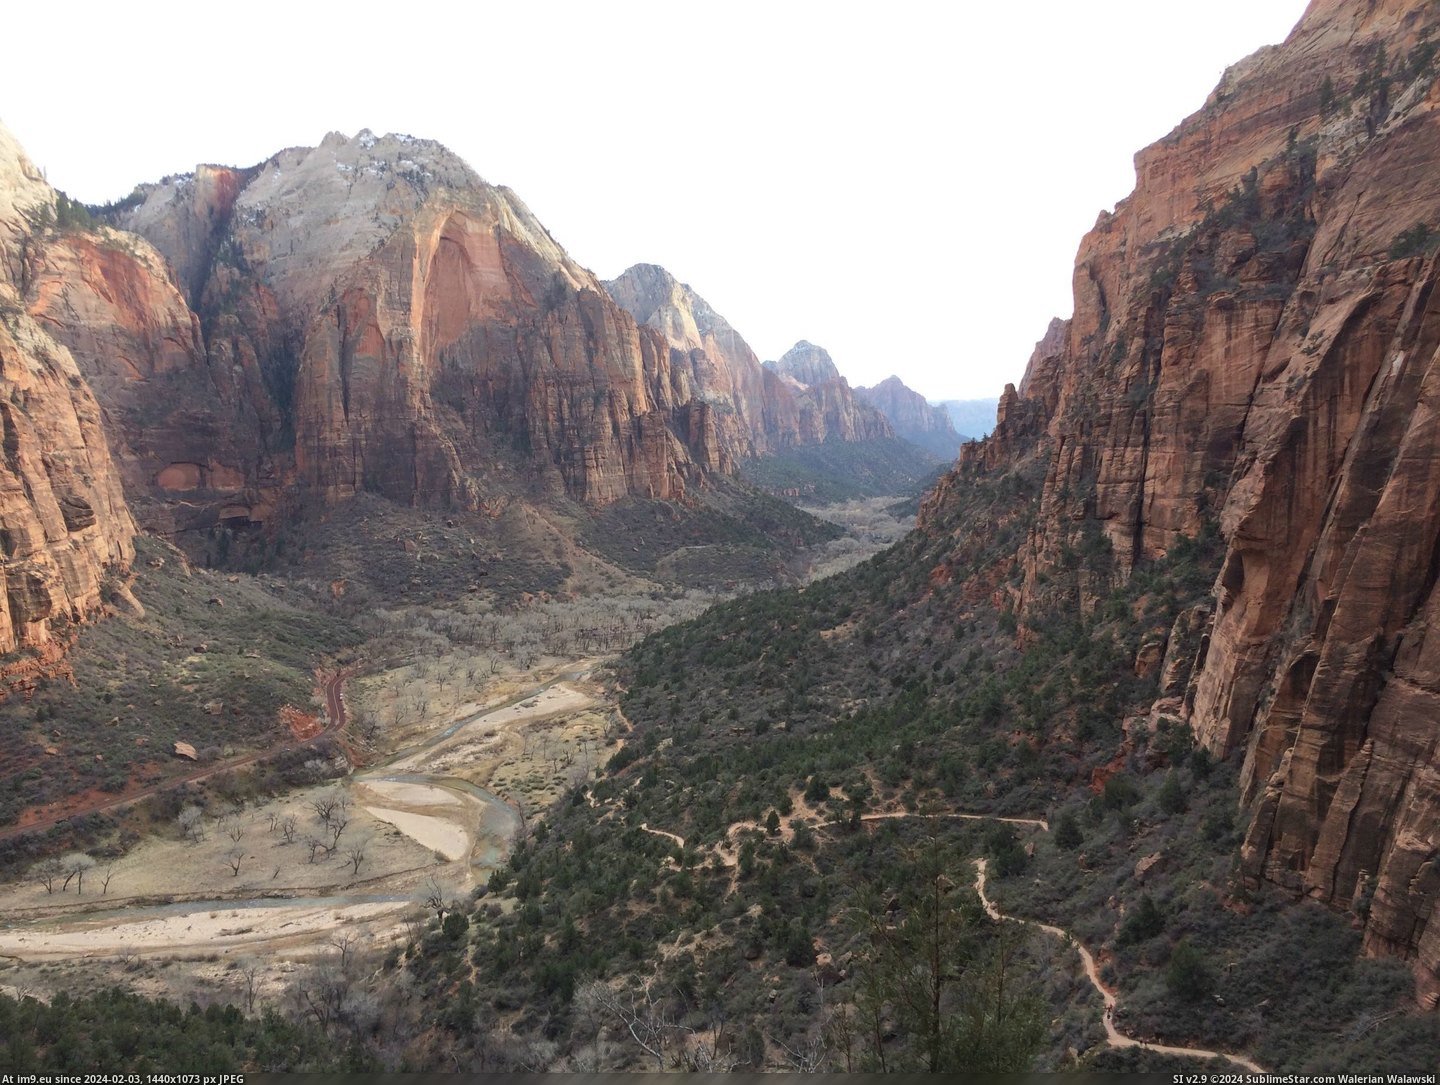 #Park #Angel #Zion #Nat #Utah #Landing [Earthporn] Angel's Landing Zion's Nat'l Park, Utah [OC] [3264 x 2448] Pic. (Image of album My r/EARTHPORN favs))